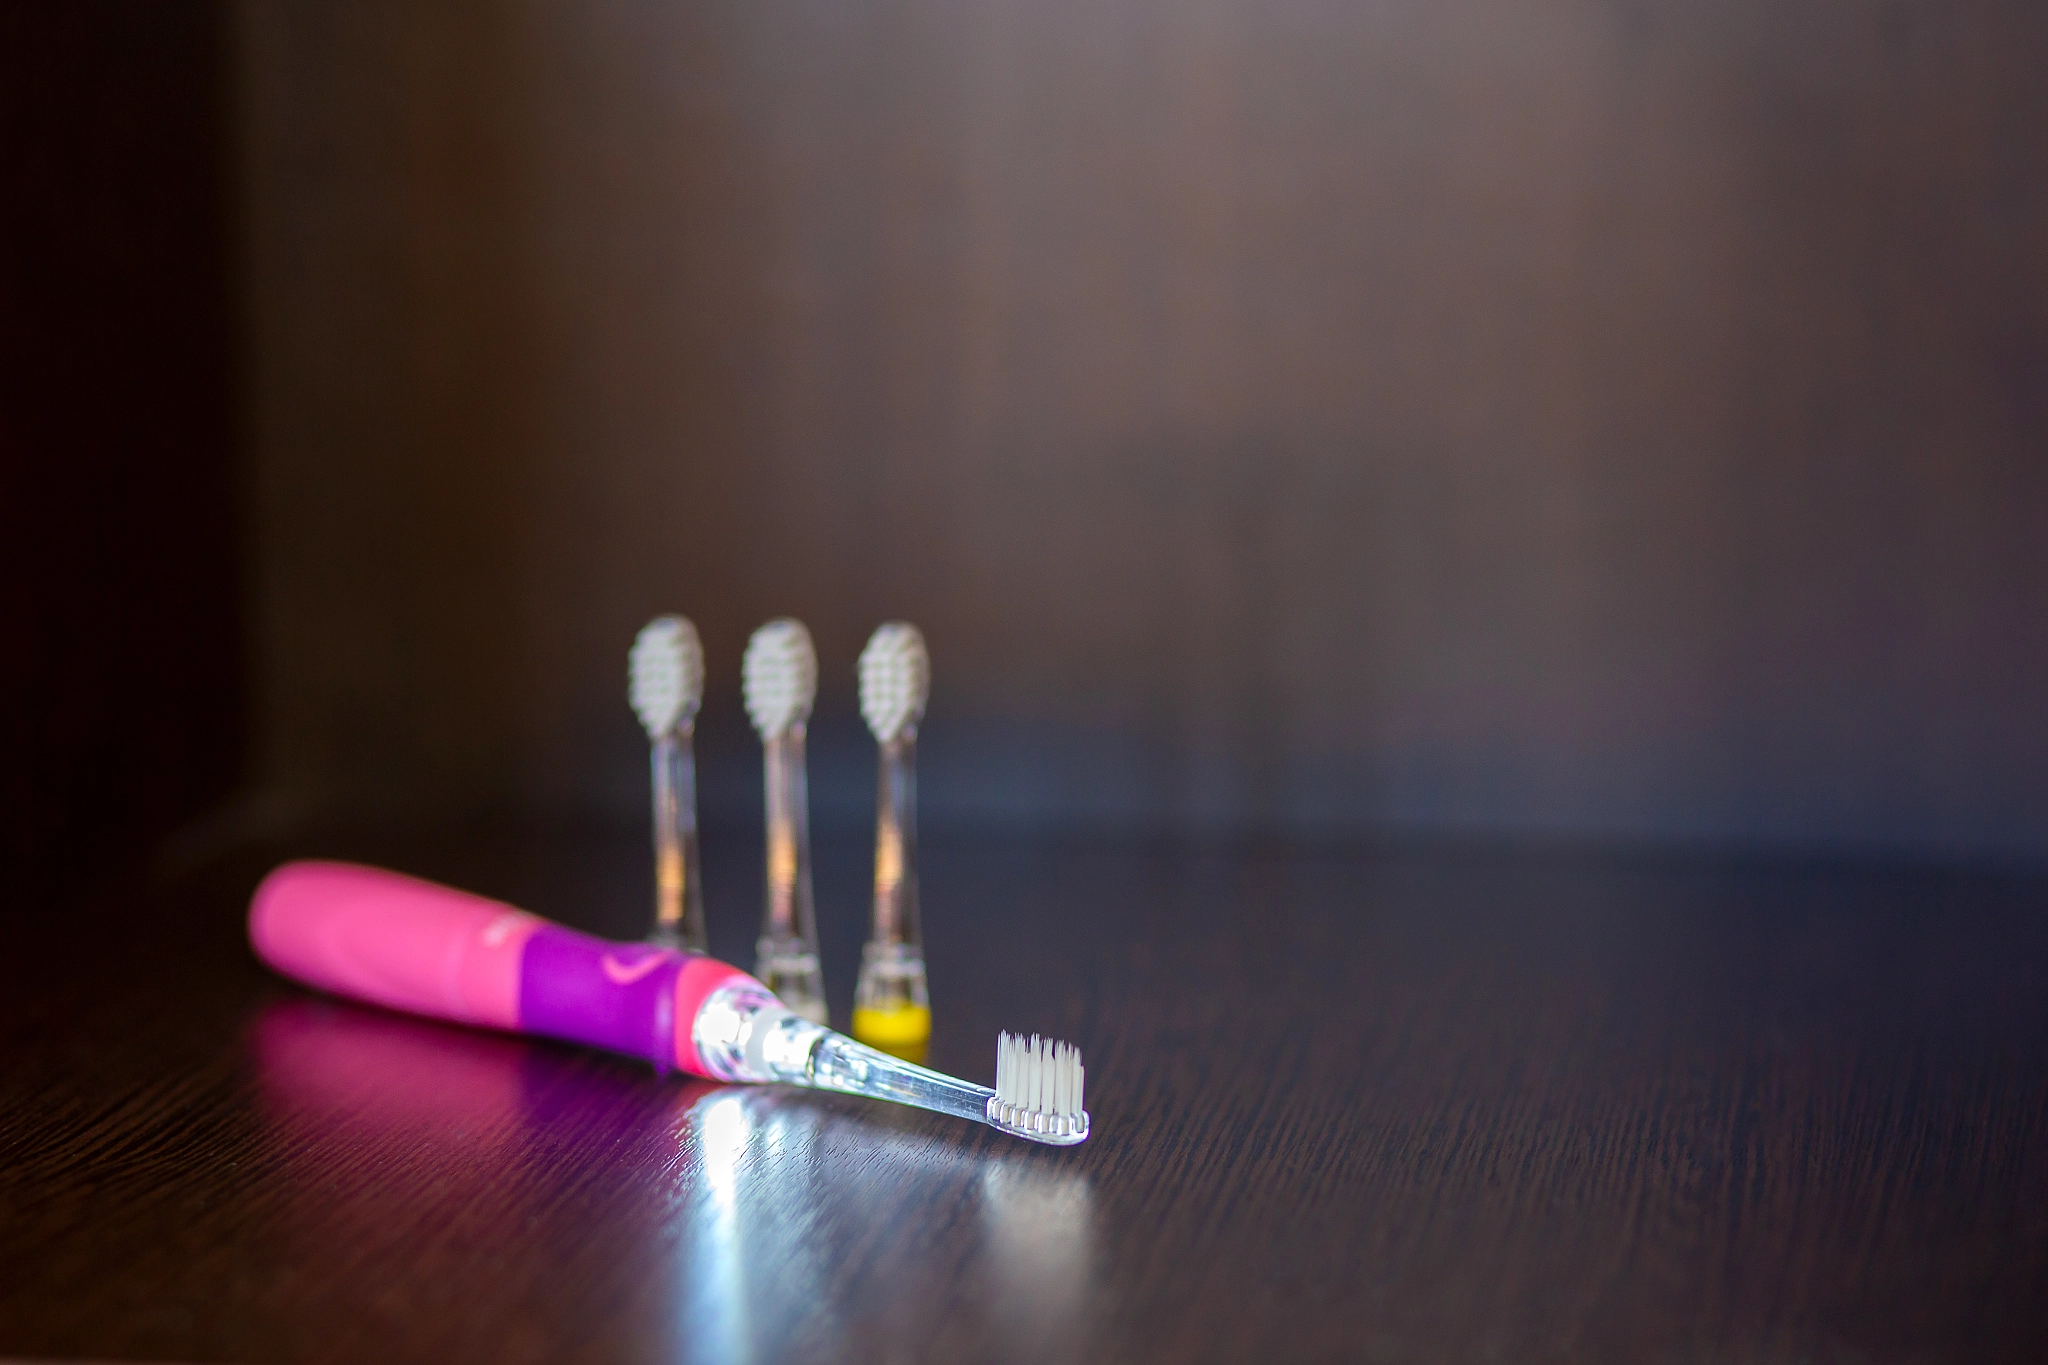 A backlit pink electric battery-powered toothbrush with three interchangeable nozzles lies on a shel